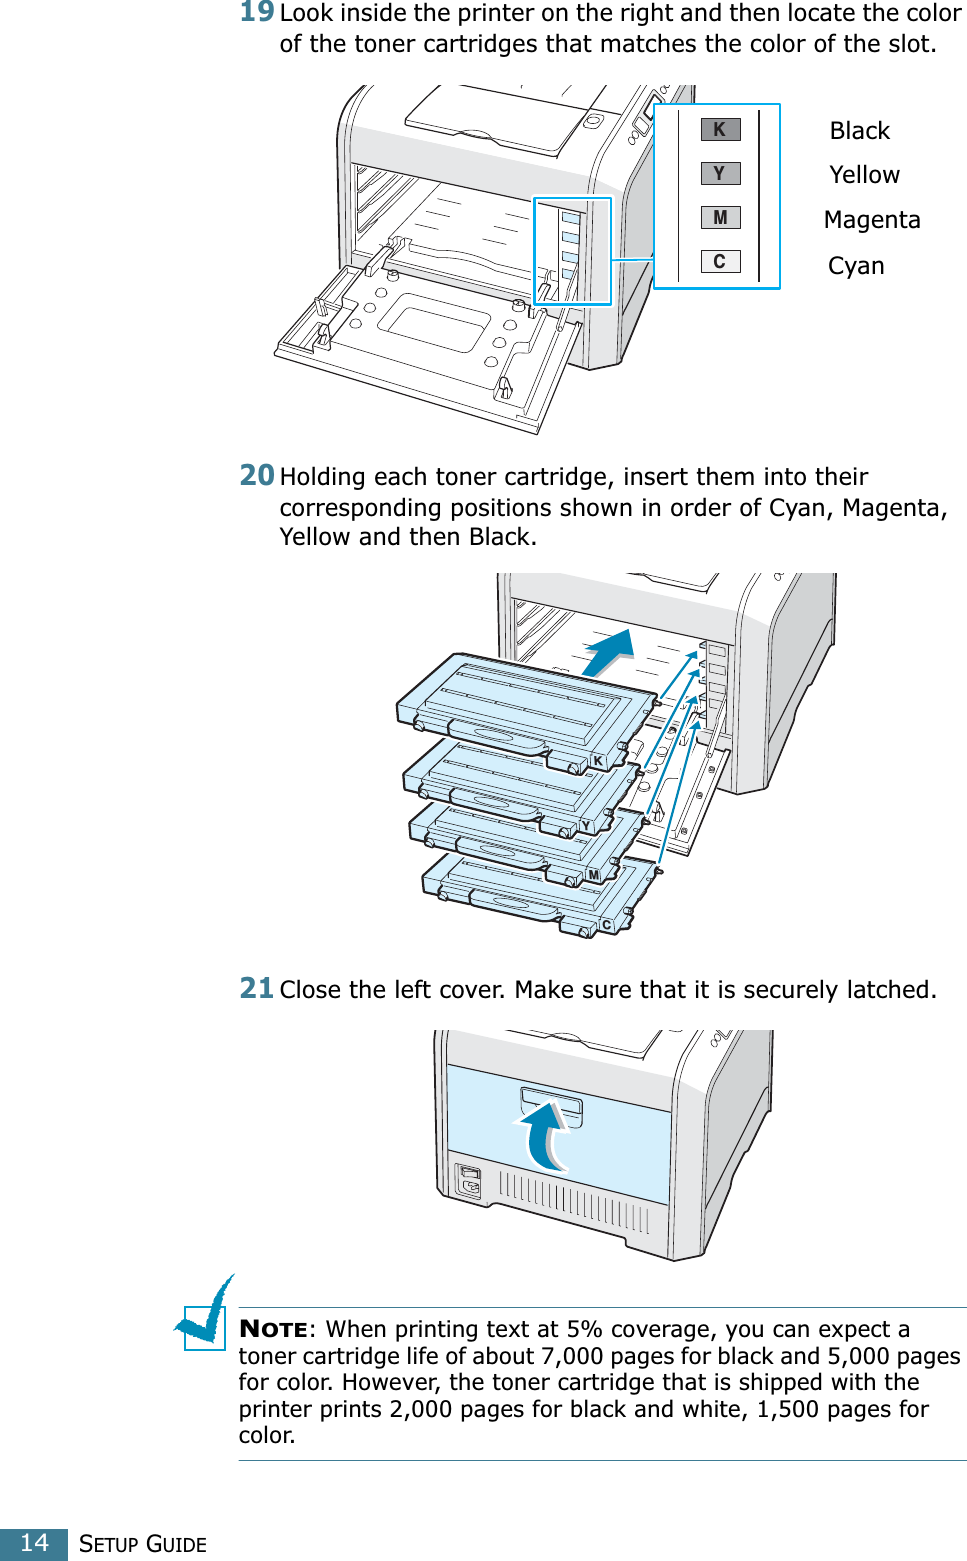 SETUP GUIDE1419Look inside the printer on the right and then locate the color of the toner cartridges that matches the color of the slot.20Holding each toner cartridge, insert them into their corresponding positions shown in order of Cyan, Magenta, Yellow and then Black.21Close the left cover. Make sure that it is securely latched.NOTE: When printing text at 5% coverage, you can expect a toner cartridge life of about 7,000 pages for black and 5,000 pages for color. However, the toner cartridge that is shipped with the printer prints 2,000 pages for black and white, 1,500 pages for color.CMYKBlackYellowMagentaCyanMYKC